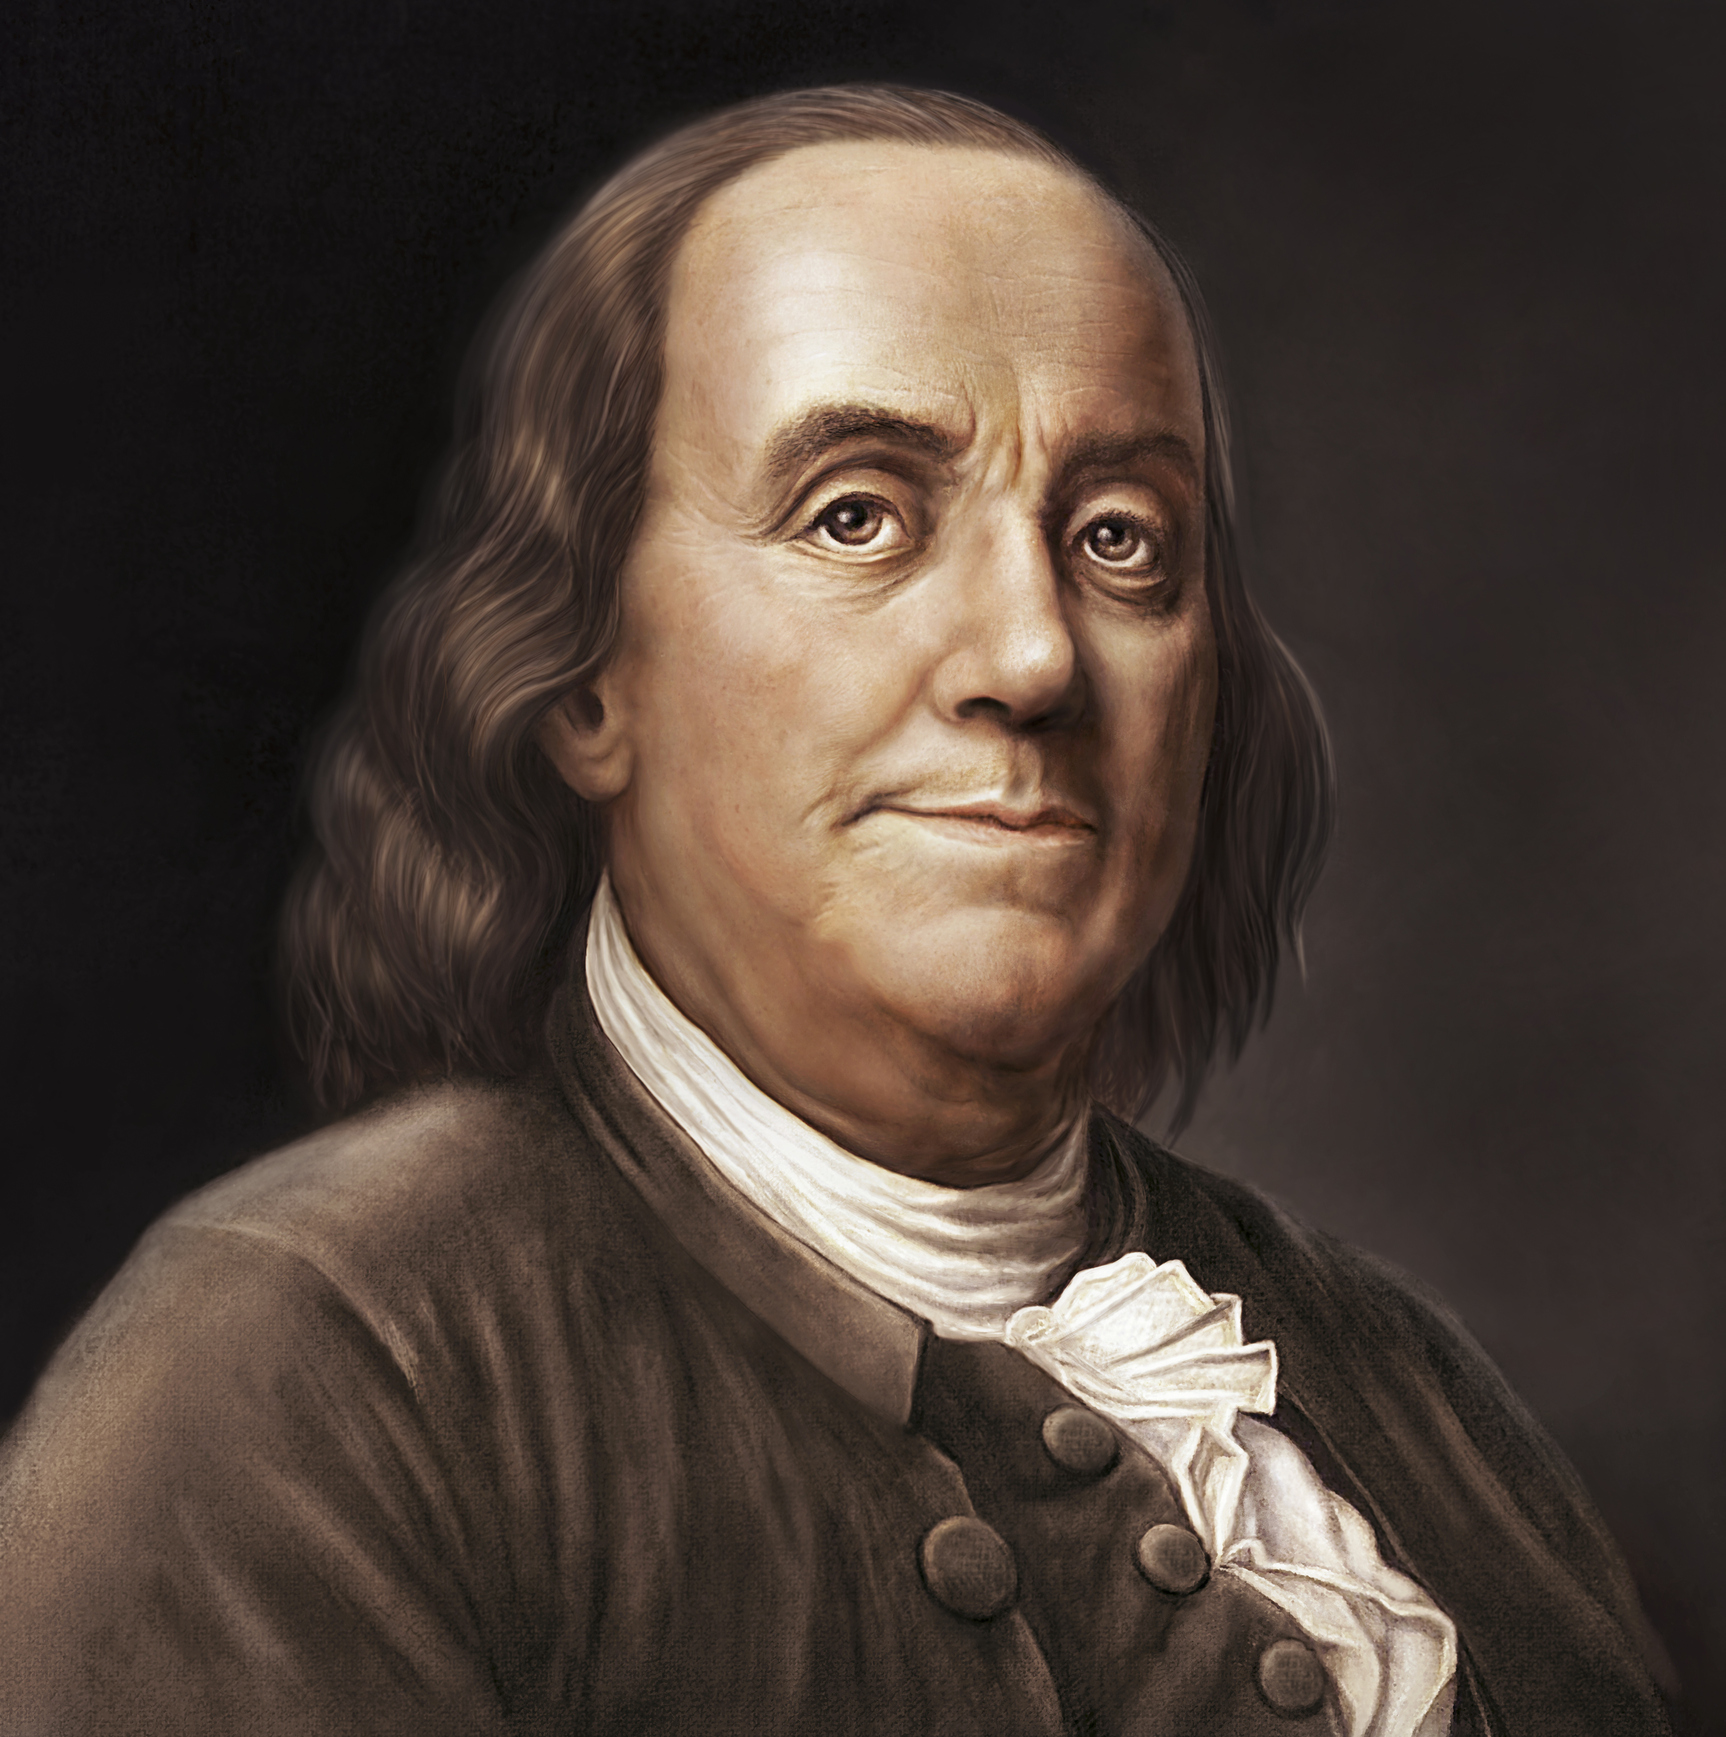 Original digital painting by Joe Cicak (submitter). Based on the well-known portrait of Ben Franklin on the US 100 bill. Painting mimics classic painting styles of the 18th century. This painting is fully released.See also my illustration of George Washington.